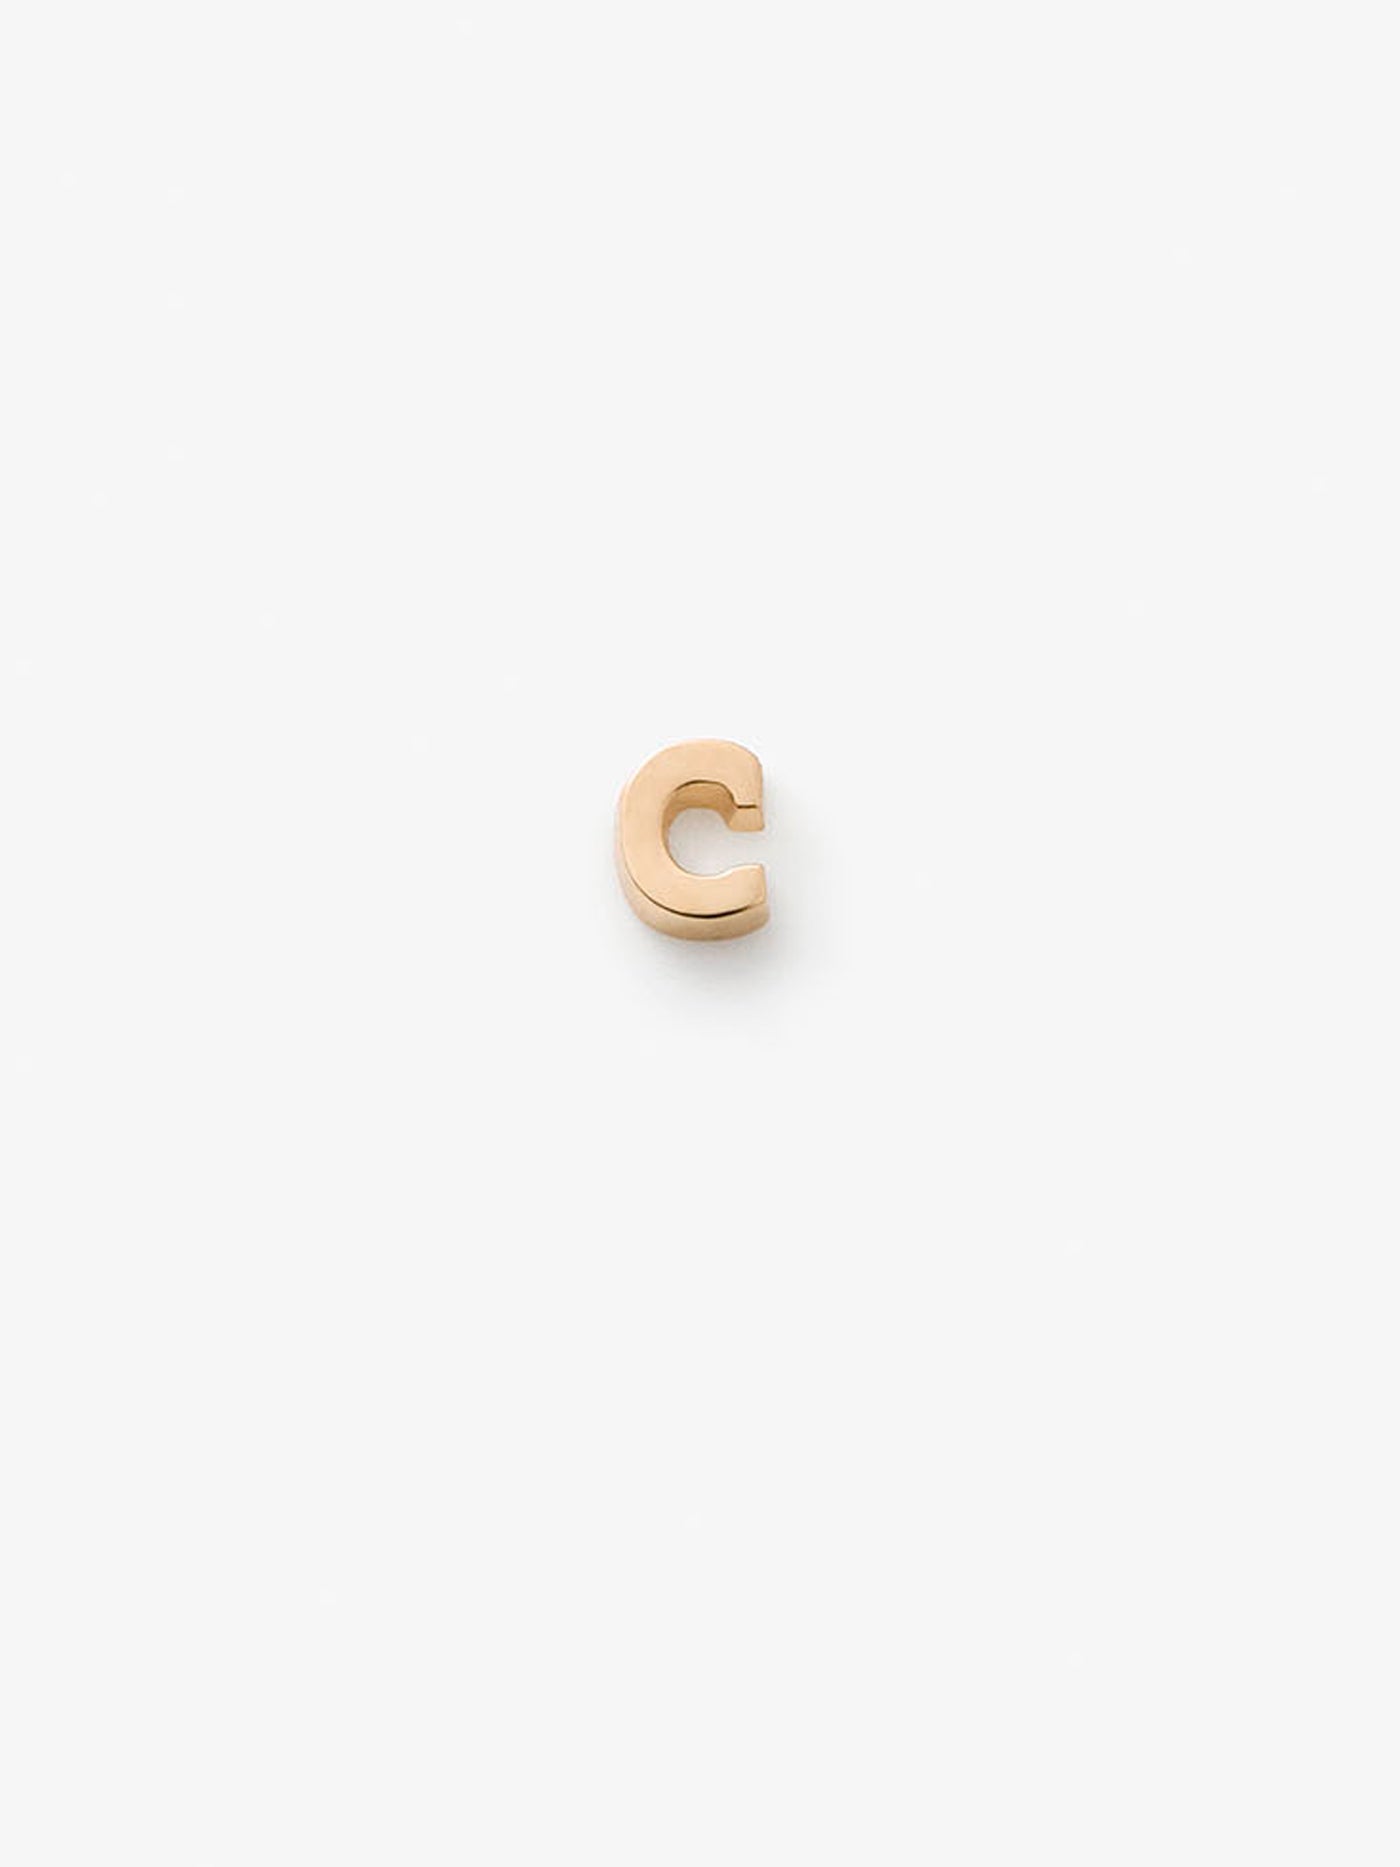 Miniature letter C single stud earring in 18k solid gold with a butterfly fastening for pierced ears. 